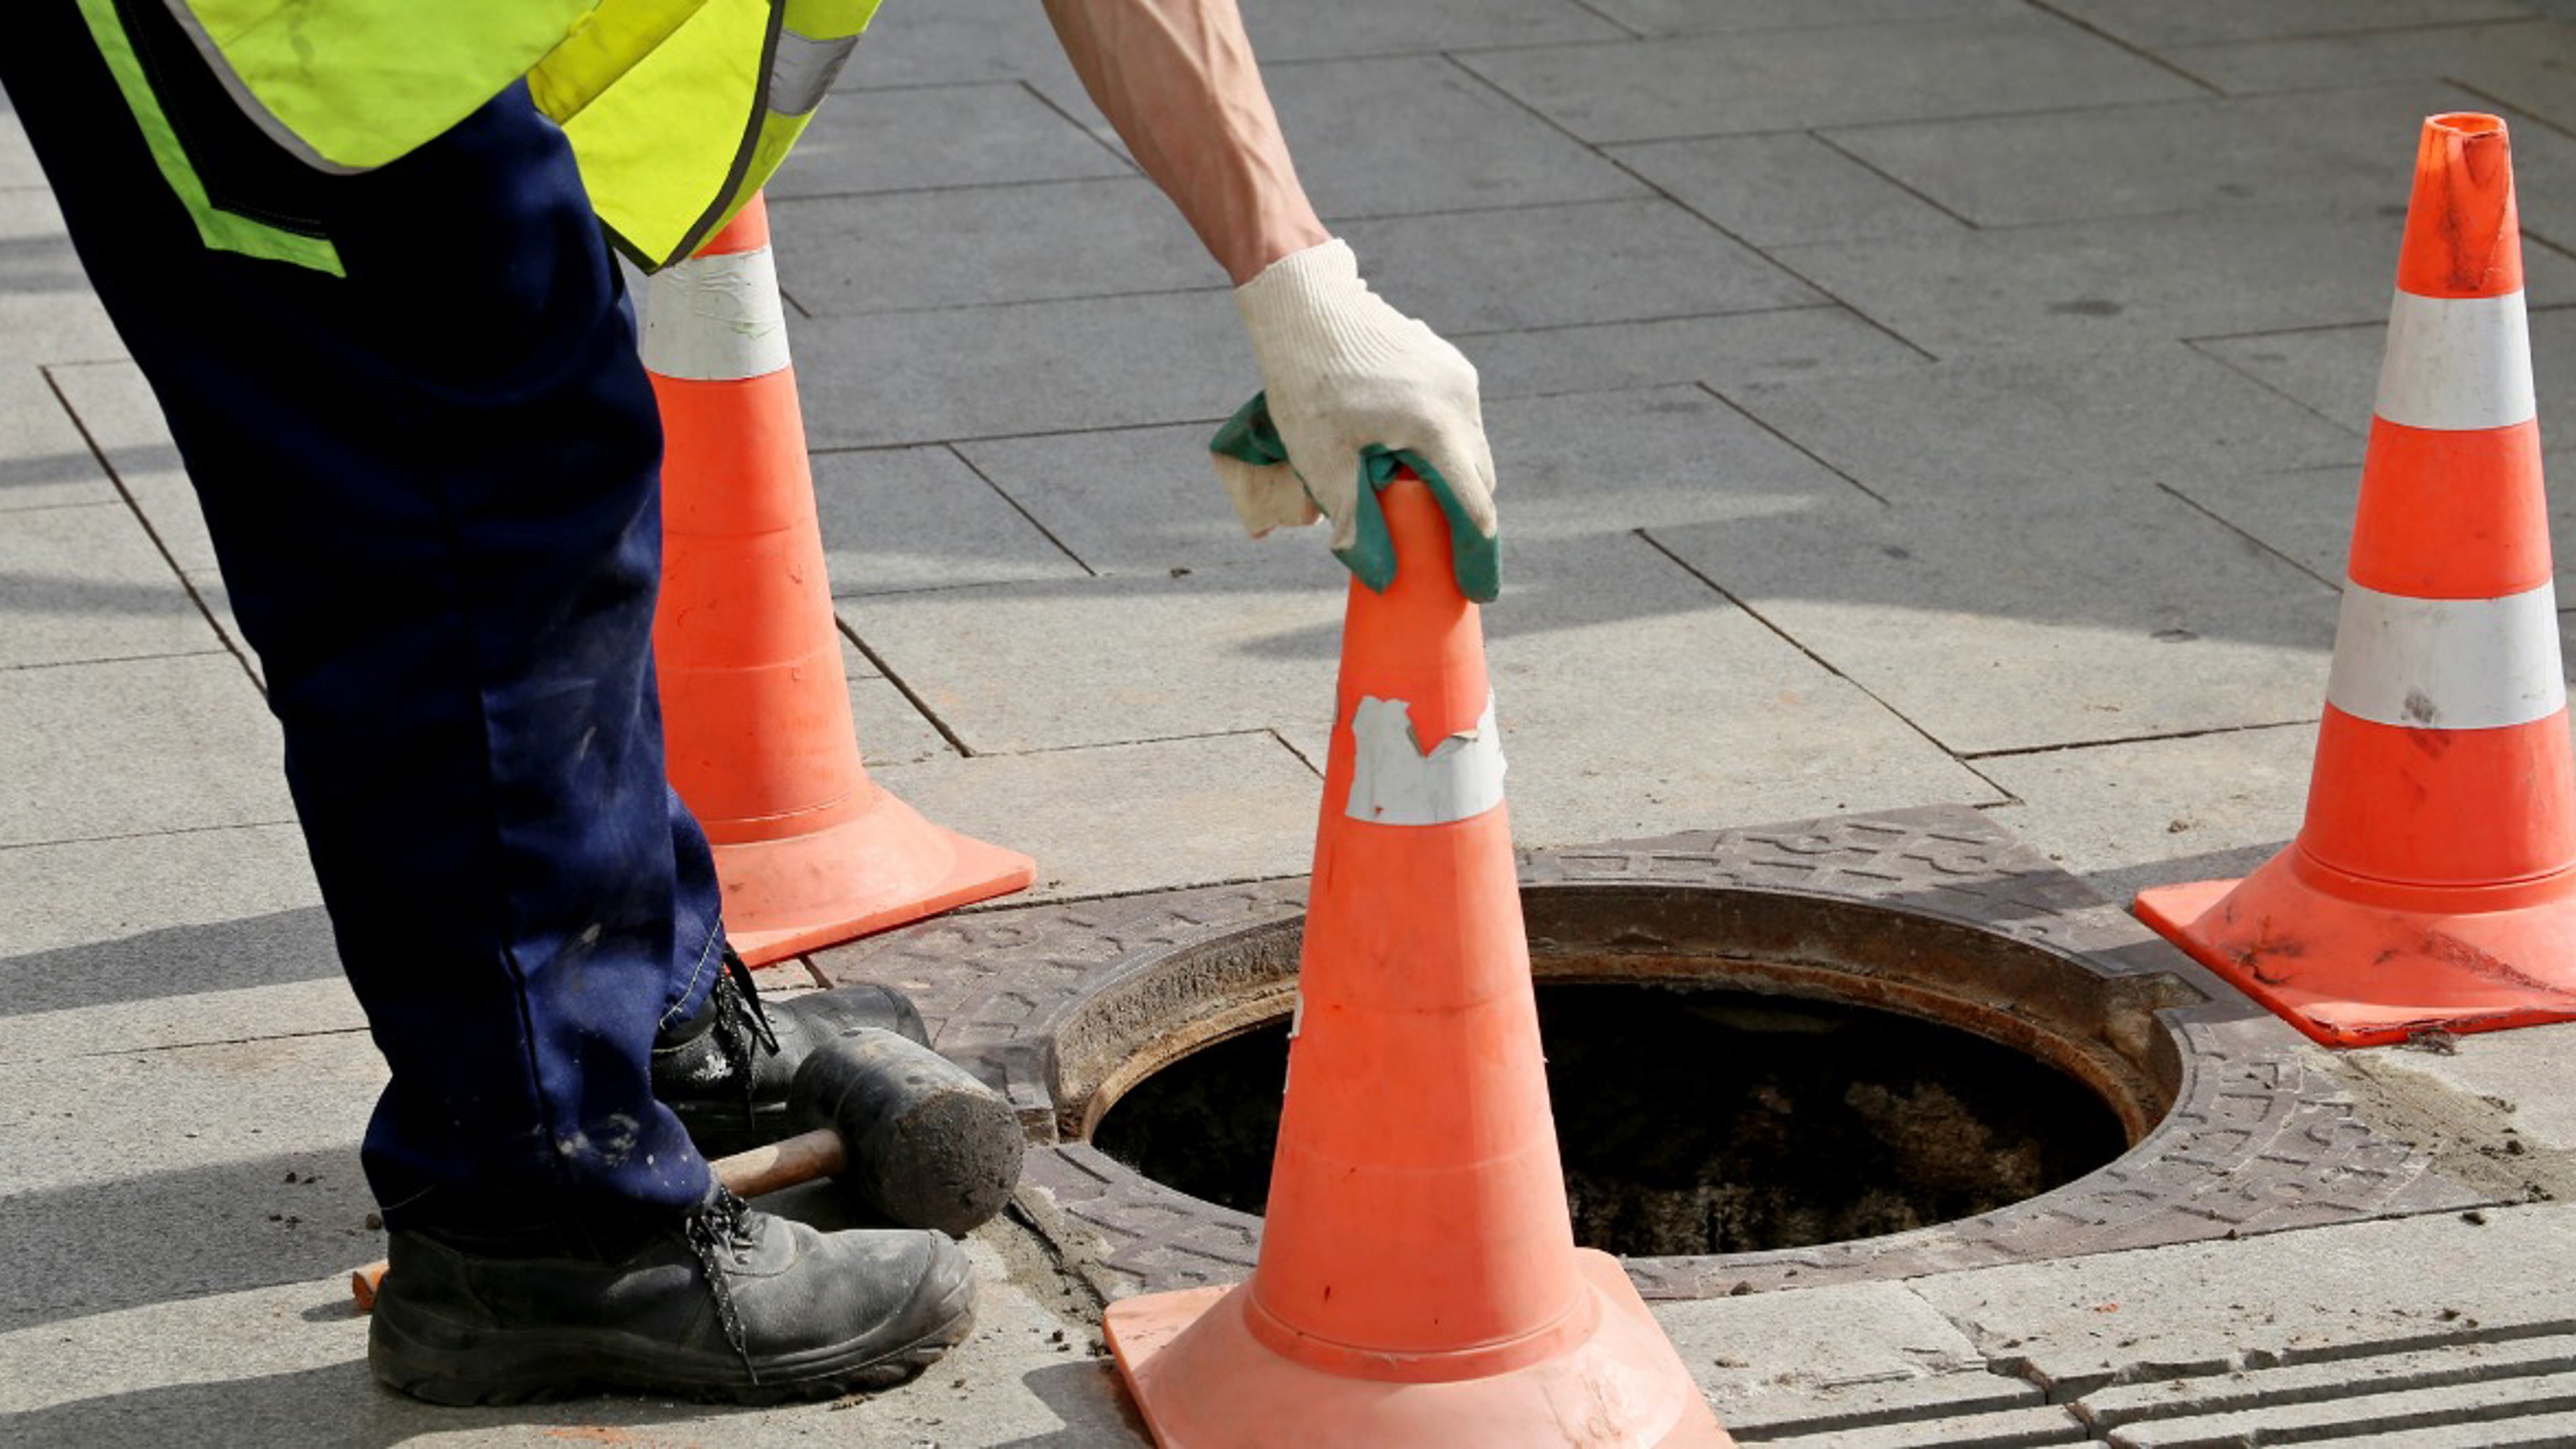 Revised guidance for national sewer baiting